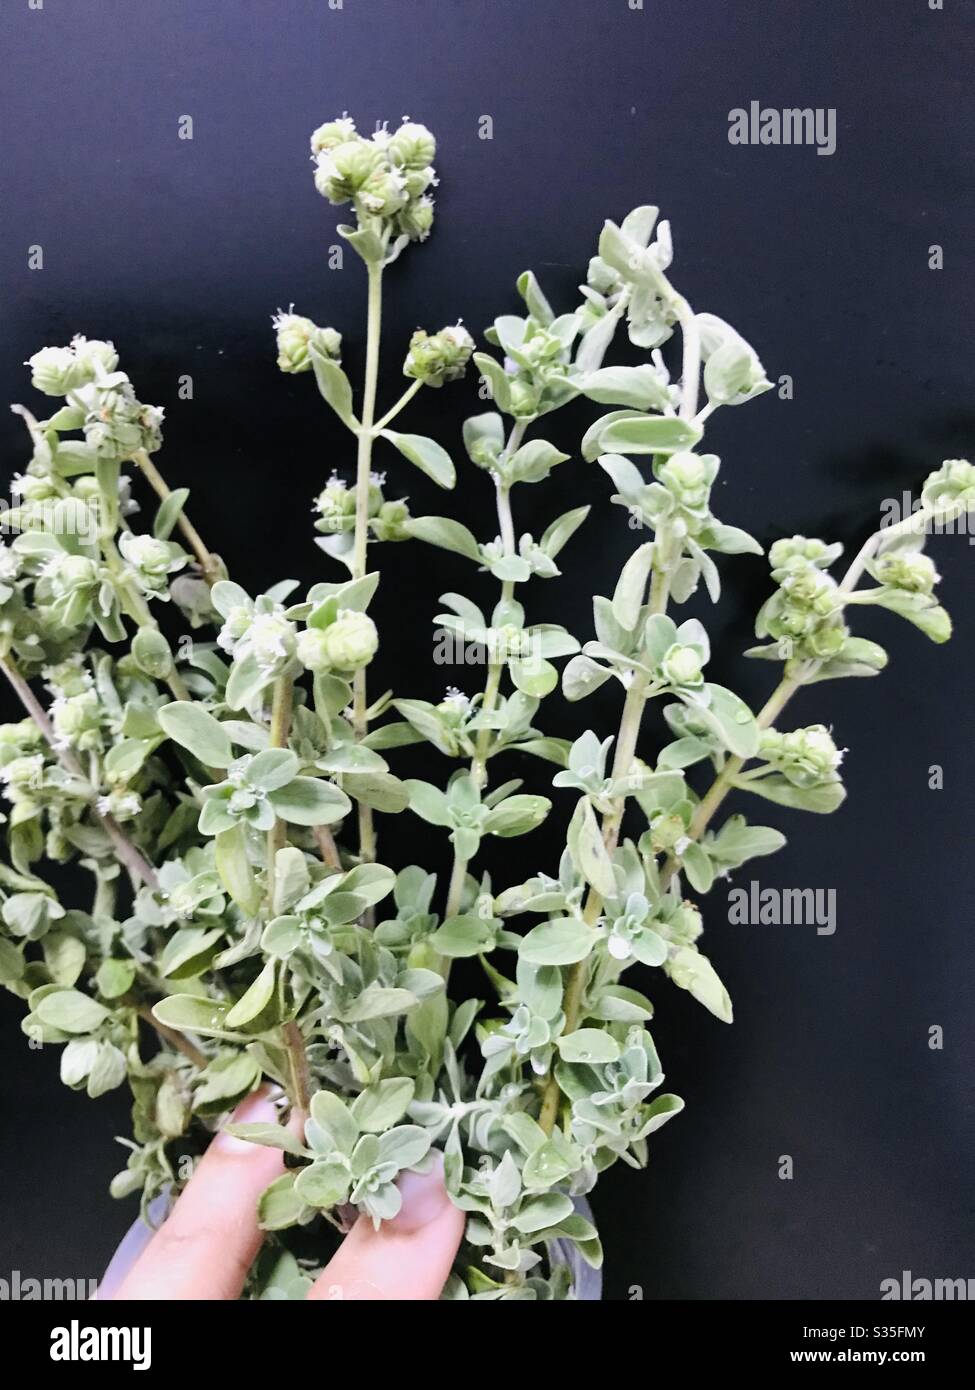 Origanum Majorana-Marjoram bought from indian florists shop aka Artemisia pallens , Marikozhundhu in Tamil, Davanam, Herbal live plant , used for medicated oil & perfumes for its fruity fragrance, Stock Photo